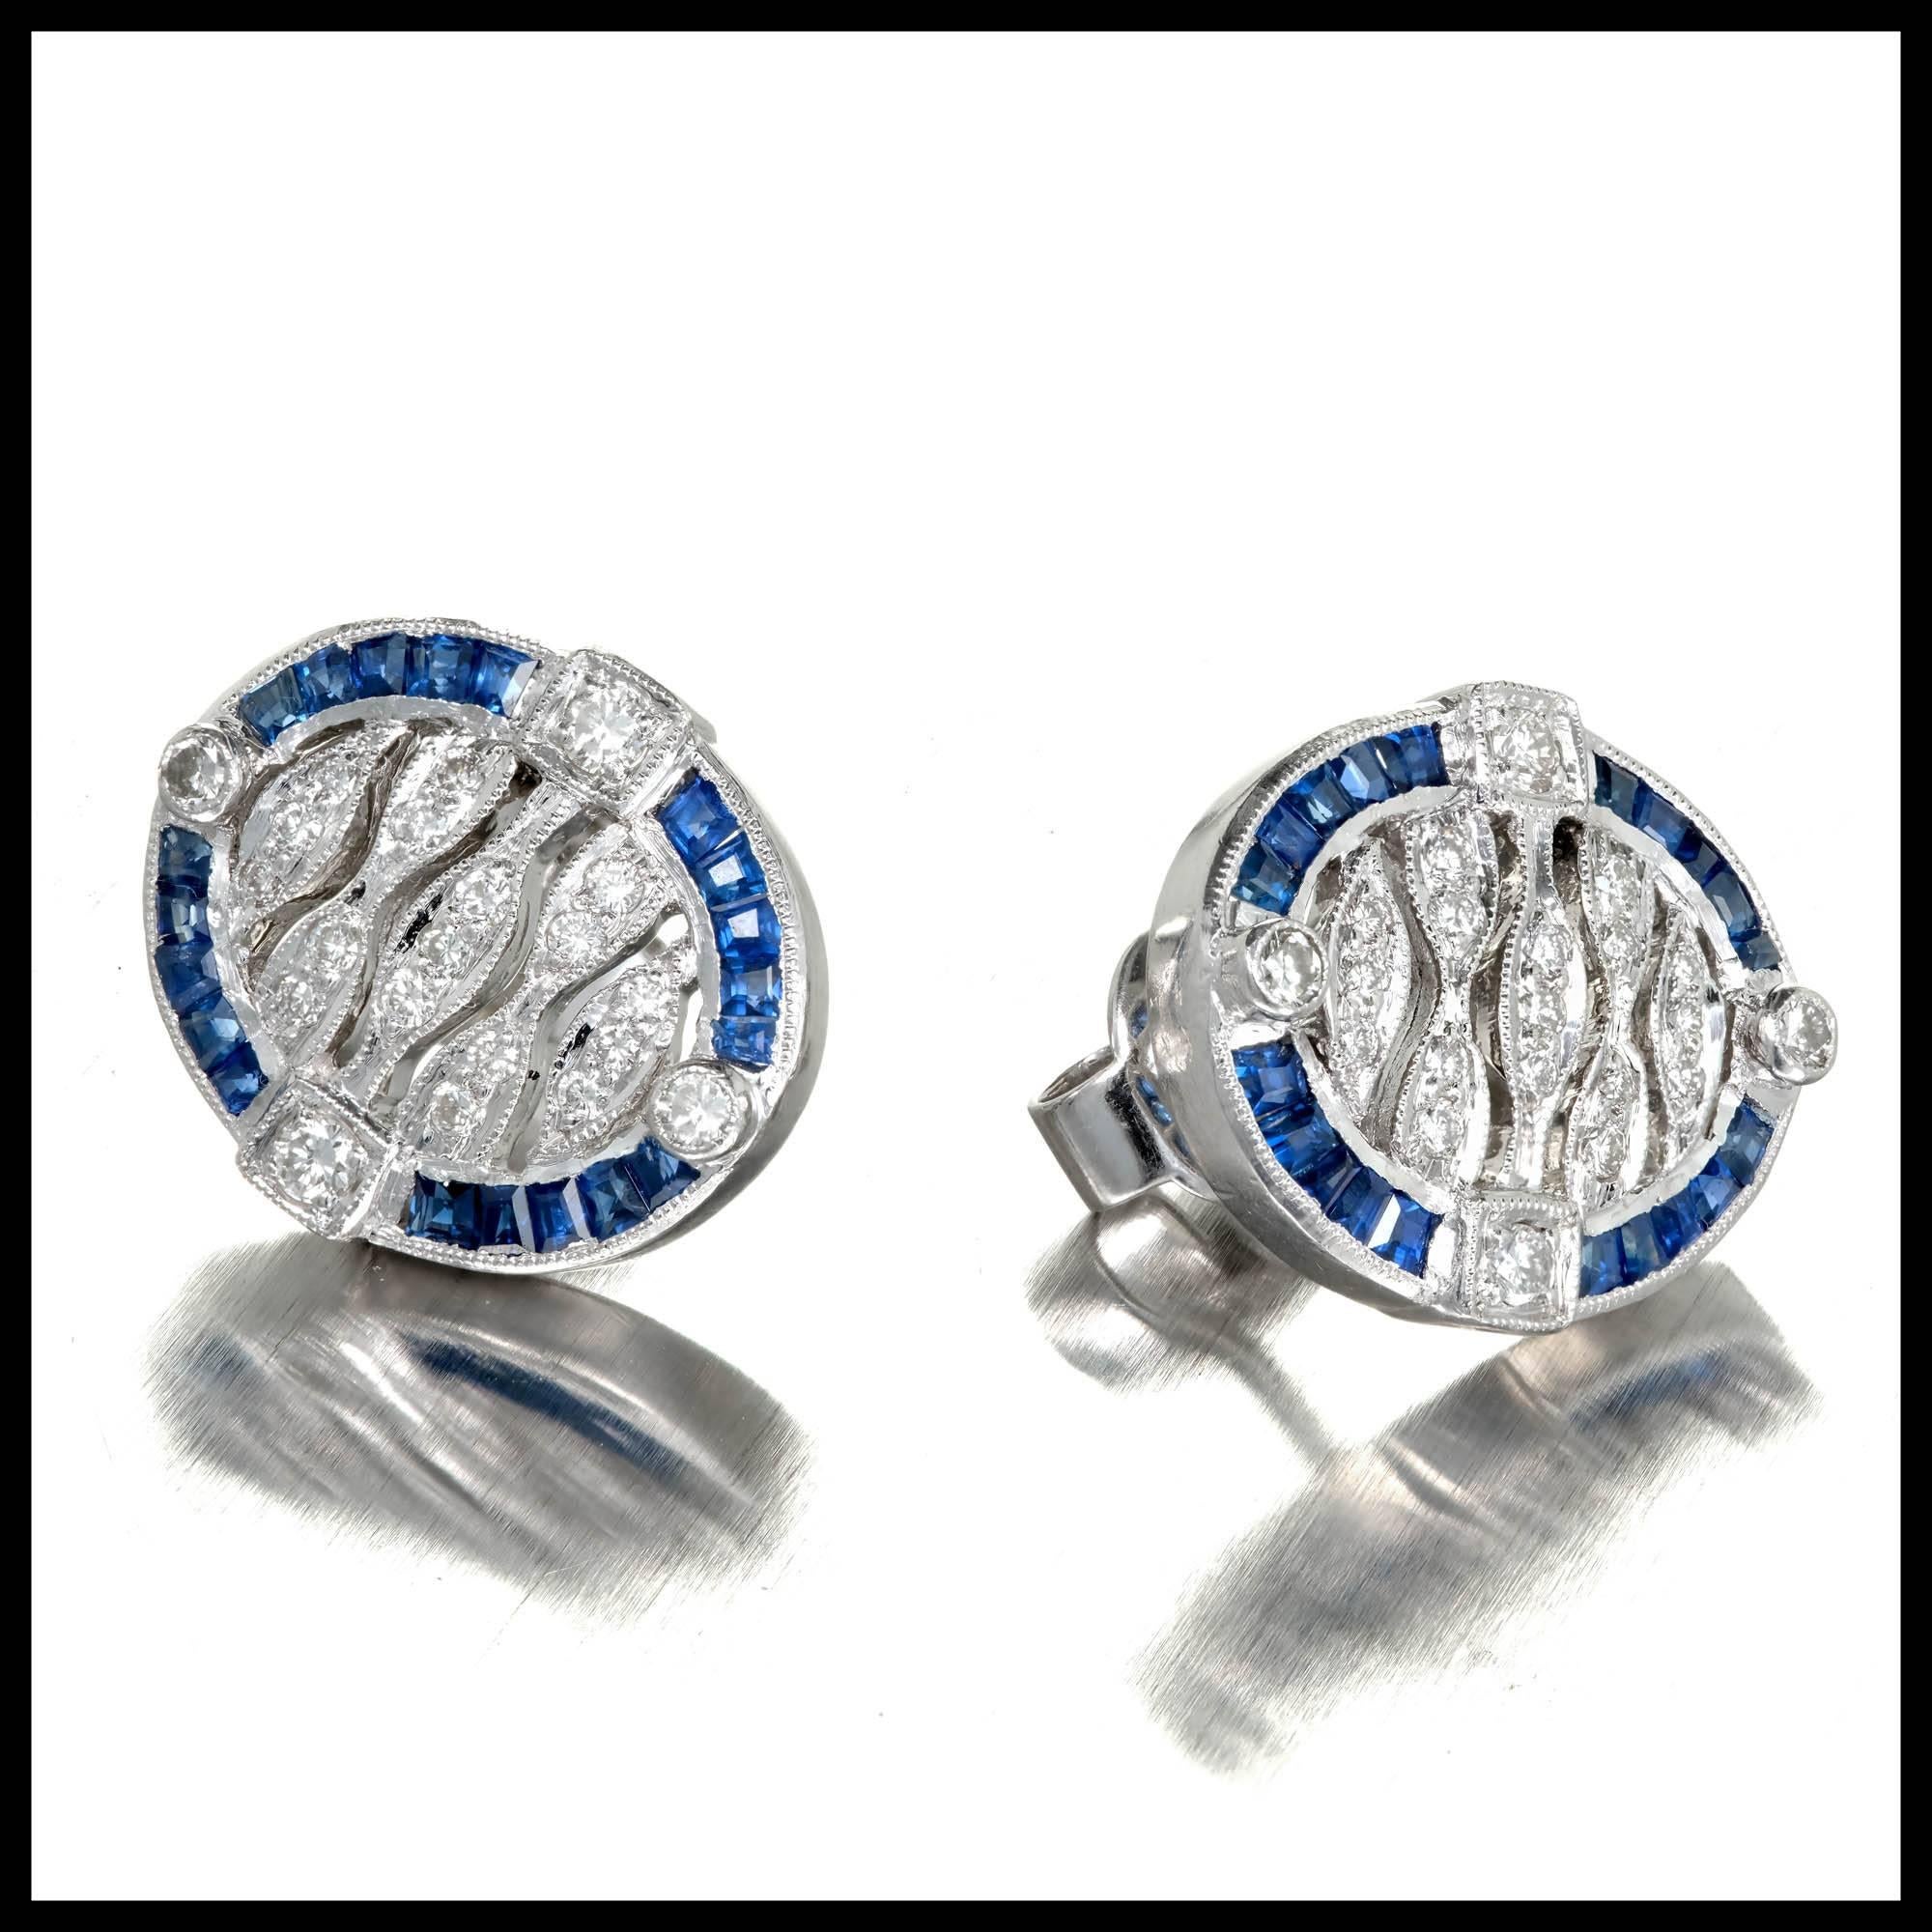 Art Deco Solid Platinum open work Sapphire diamond earrings. Square channel set Sapphires and good bead set diamonds. Open work centers.

40 square genuine Sapphires, approx. total weight .25cts, bright blue
42 full cut round diamonds, approx. total